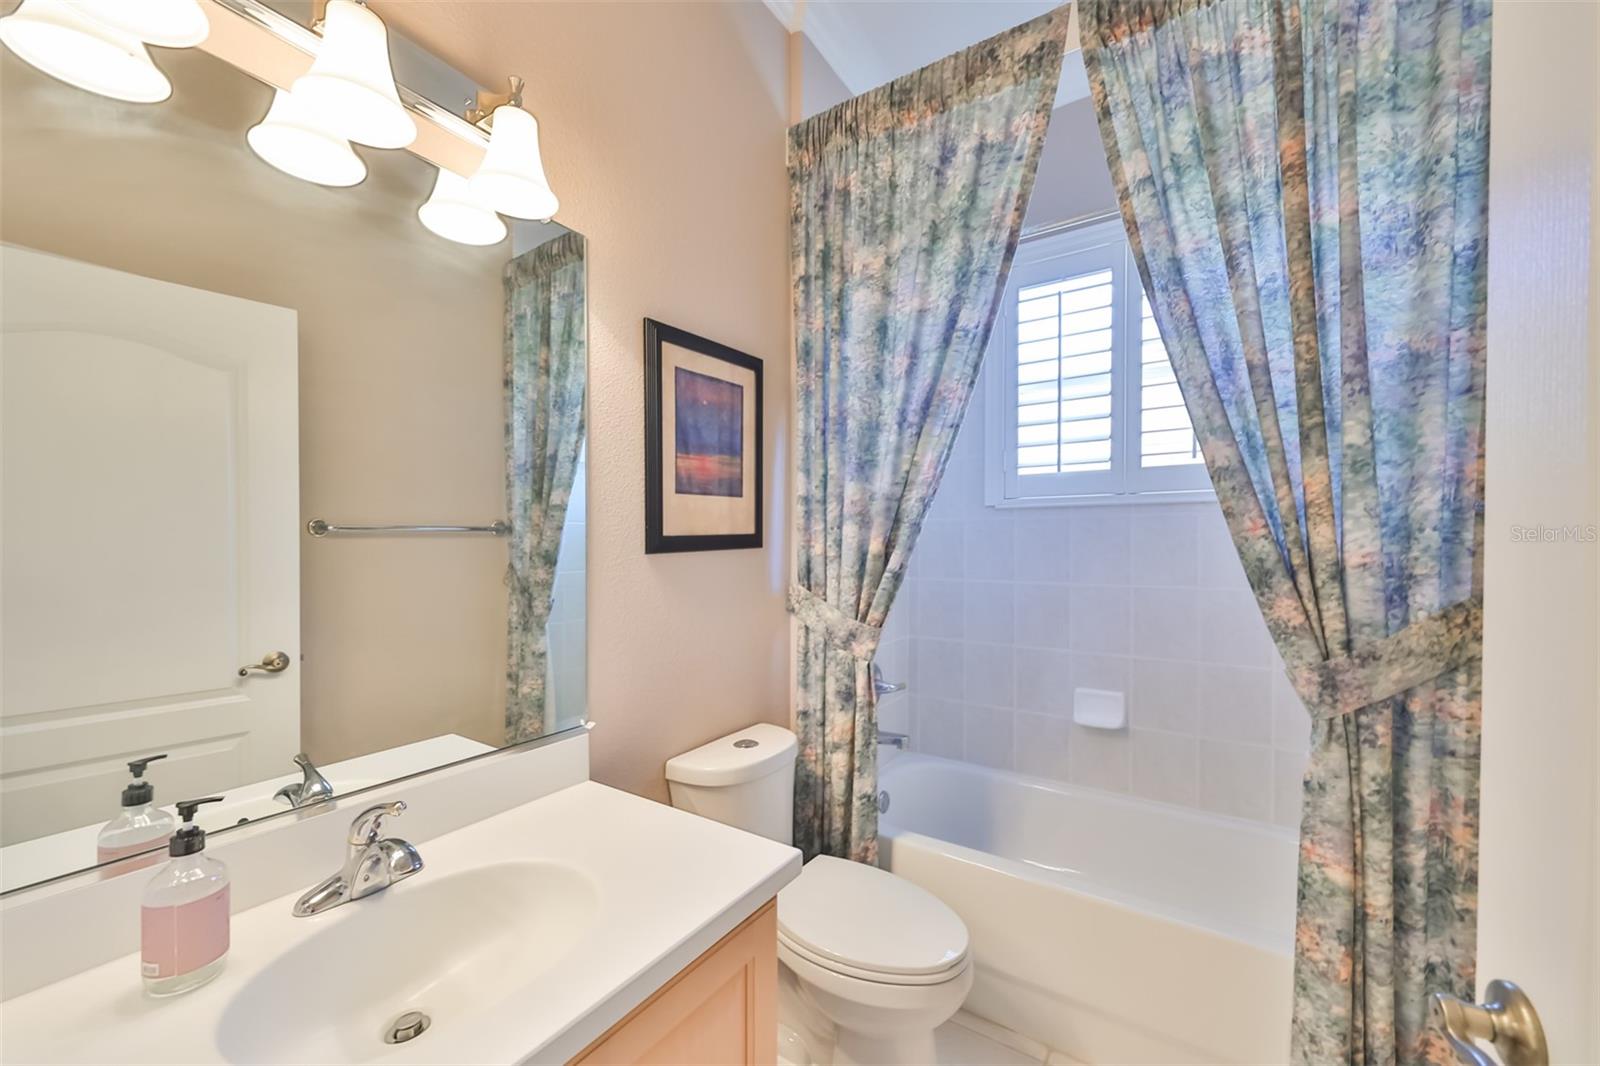 7. Guest Bathroom with plantation shutters